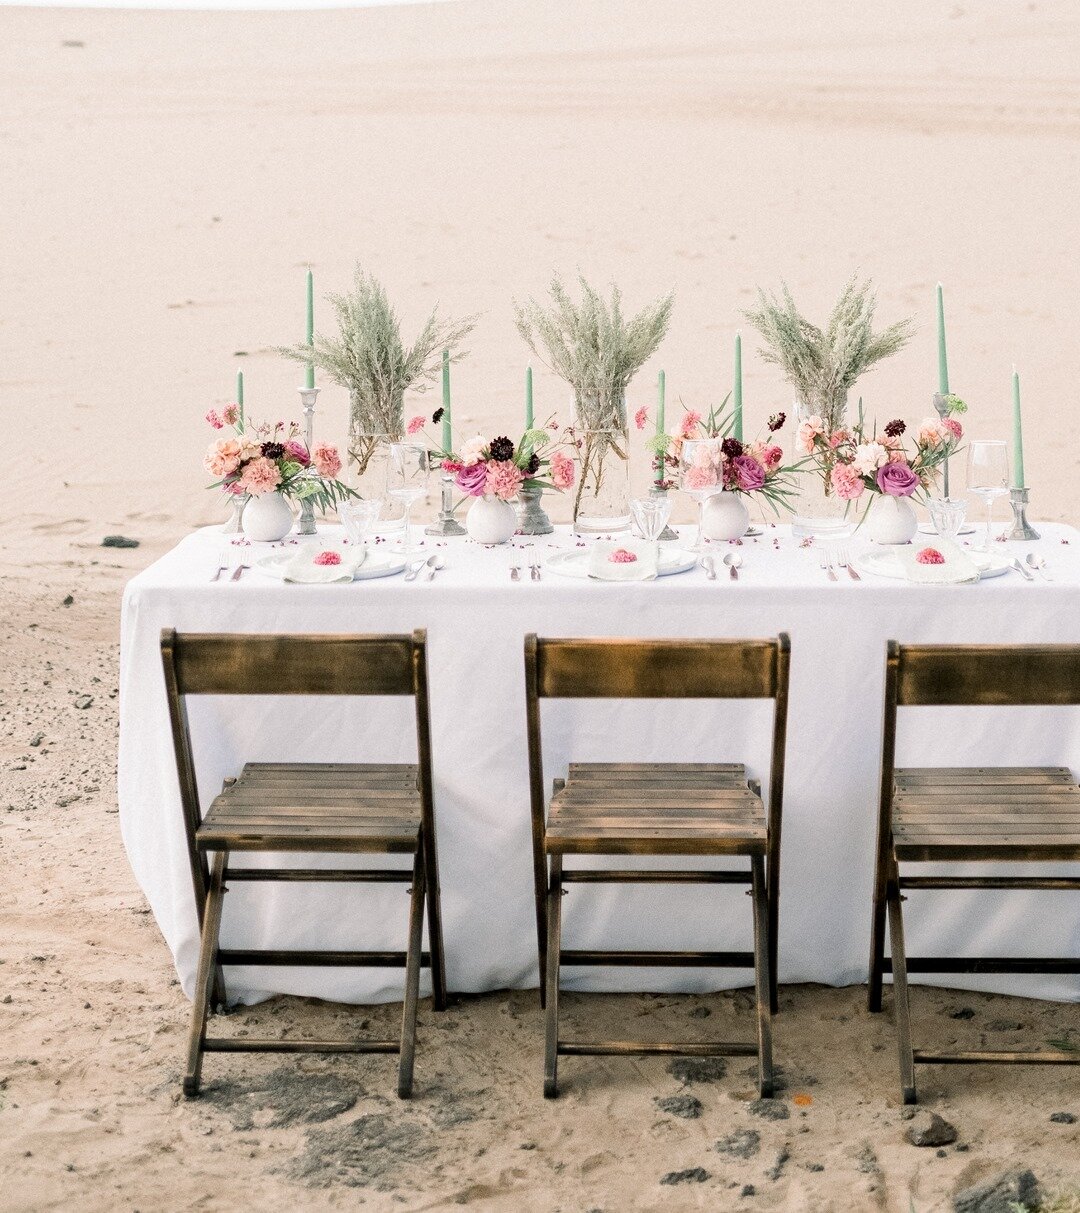 This was the year many of my brides took their weddings and made them into smaller events so they could still get married. East Idaho has these amazing sand dunes and it's one of those beautiful places that is perfect for an intimate event.⠀⠀⠀⠀⠀⠀⠀
..